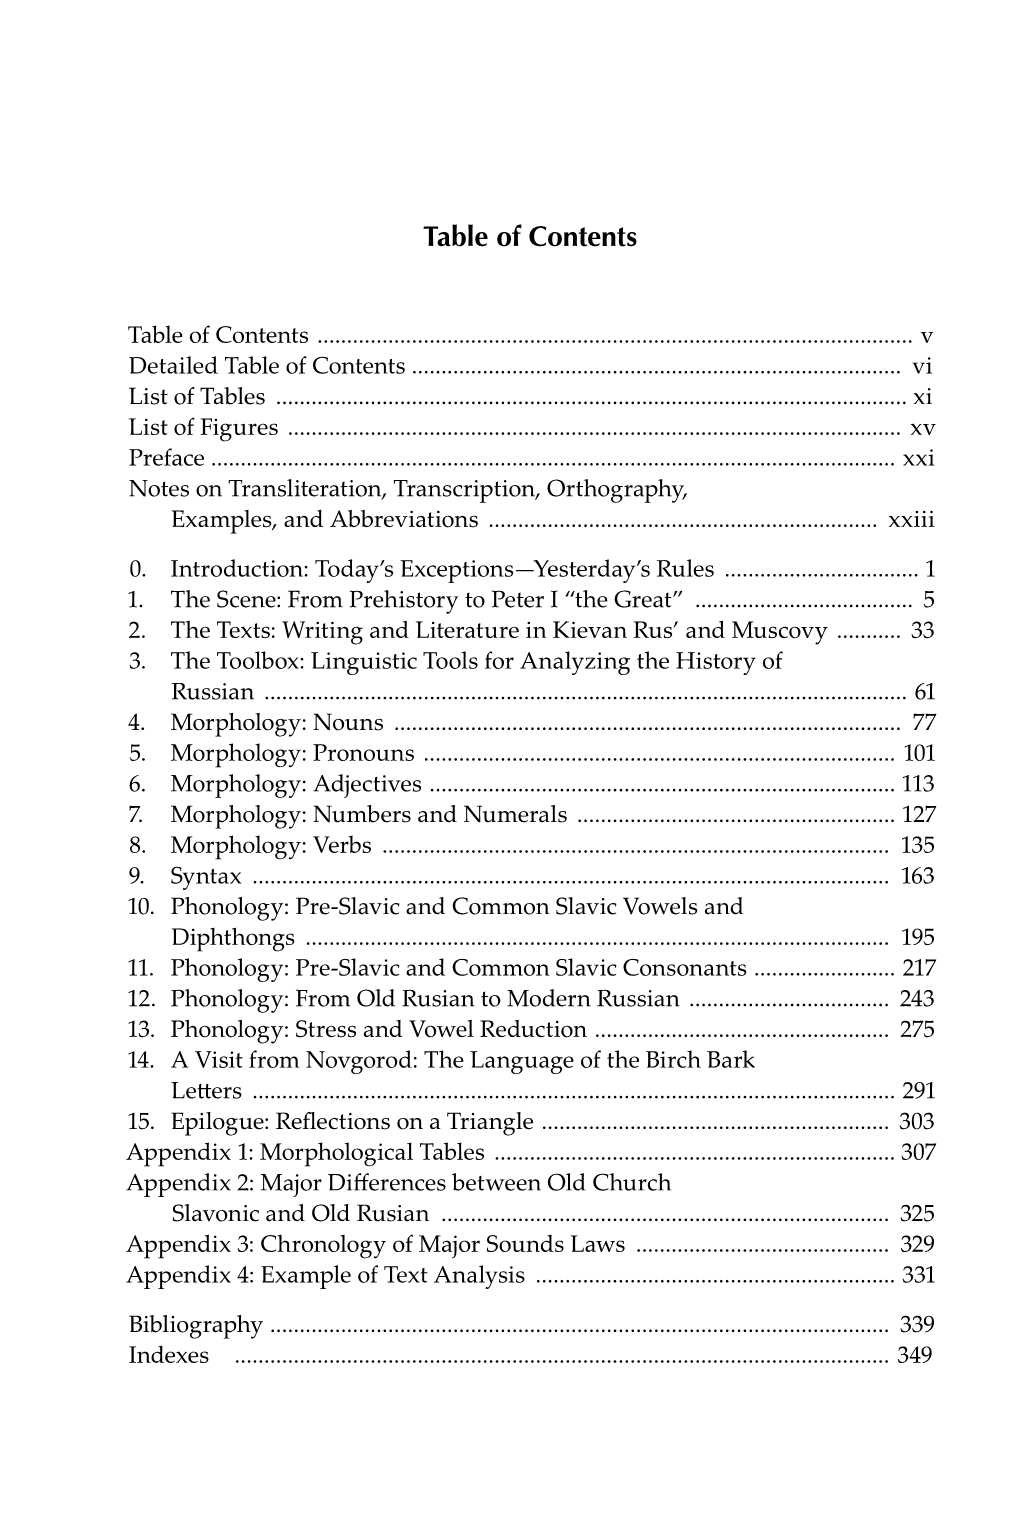 Table of Contents.Pdf